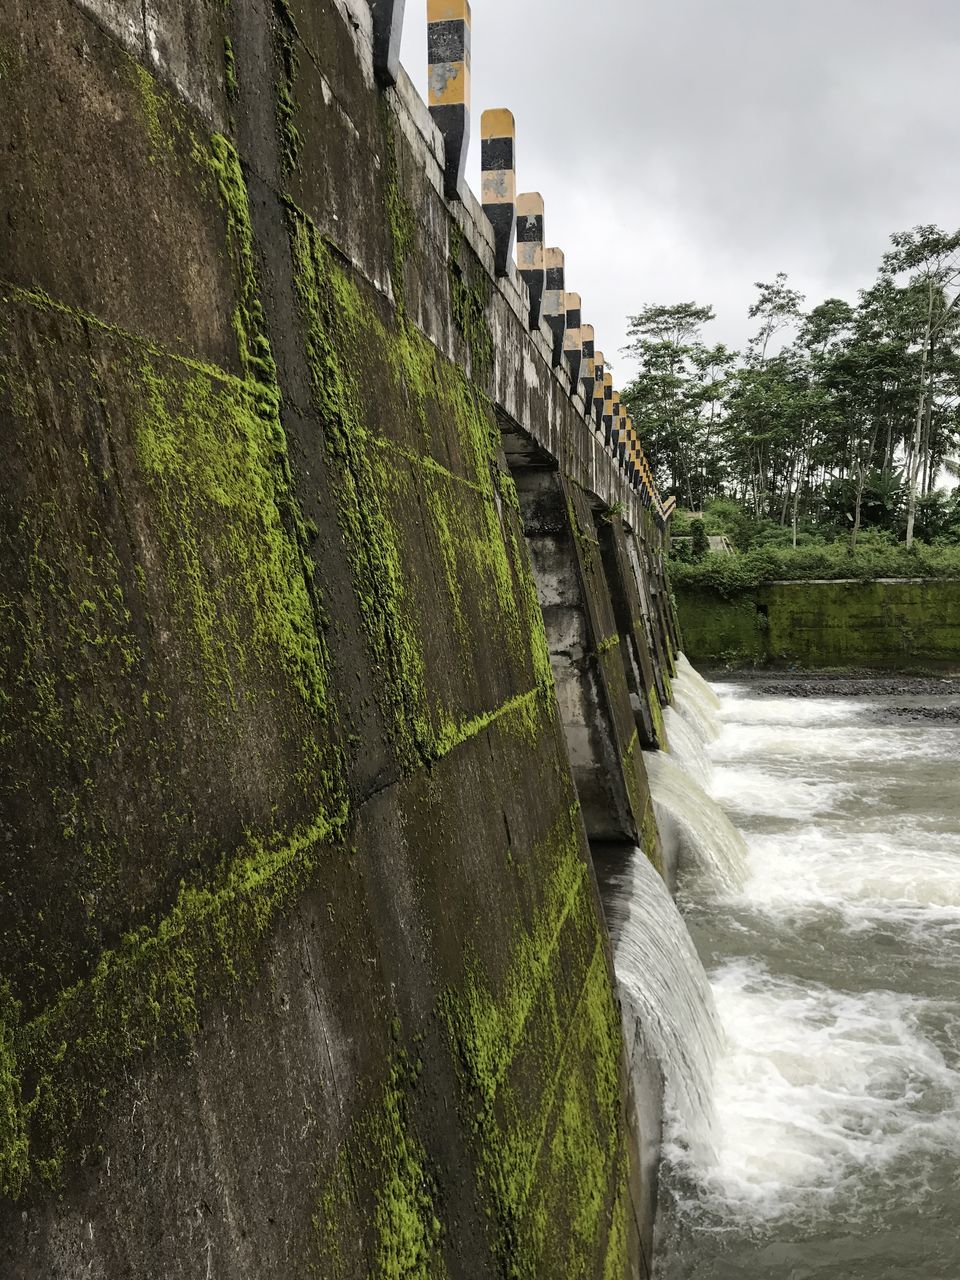 VIEW OF DAM ON WALL